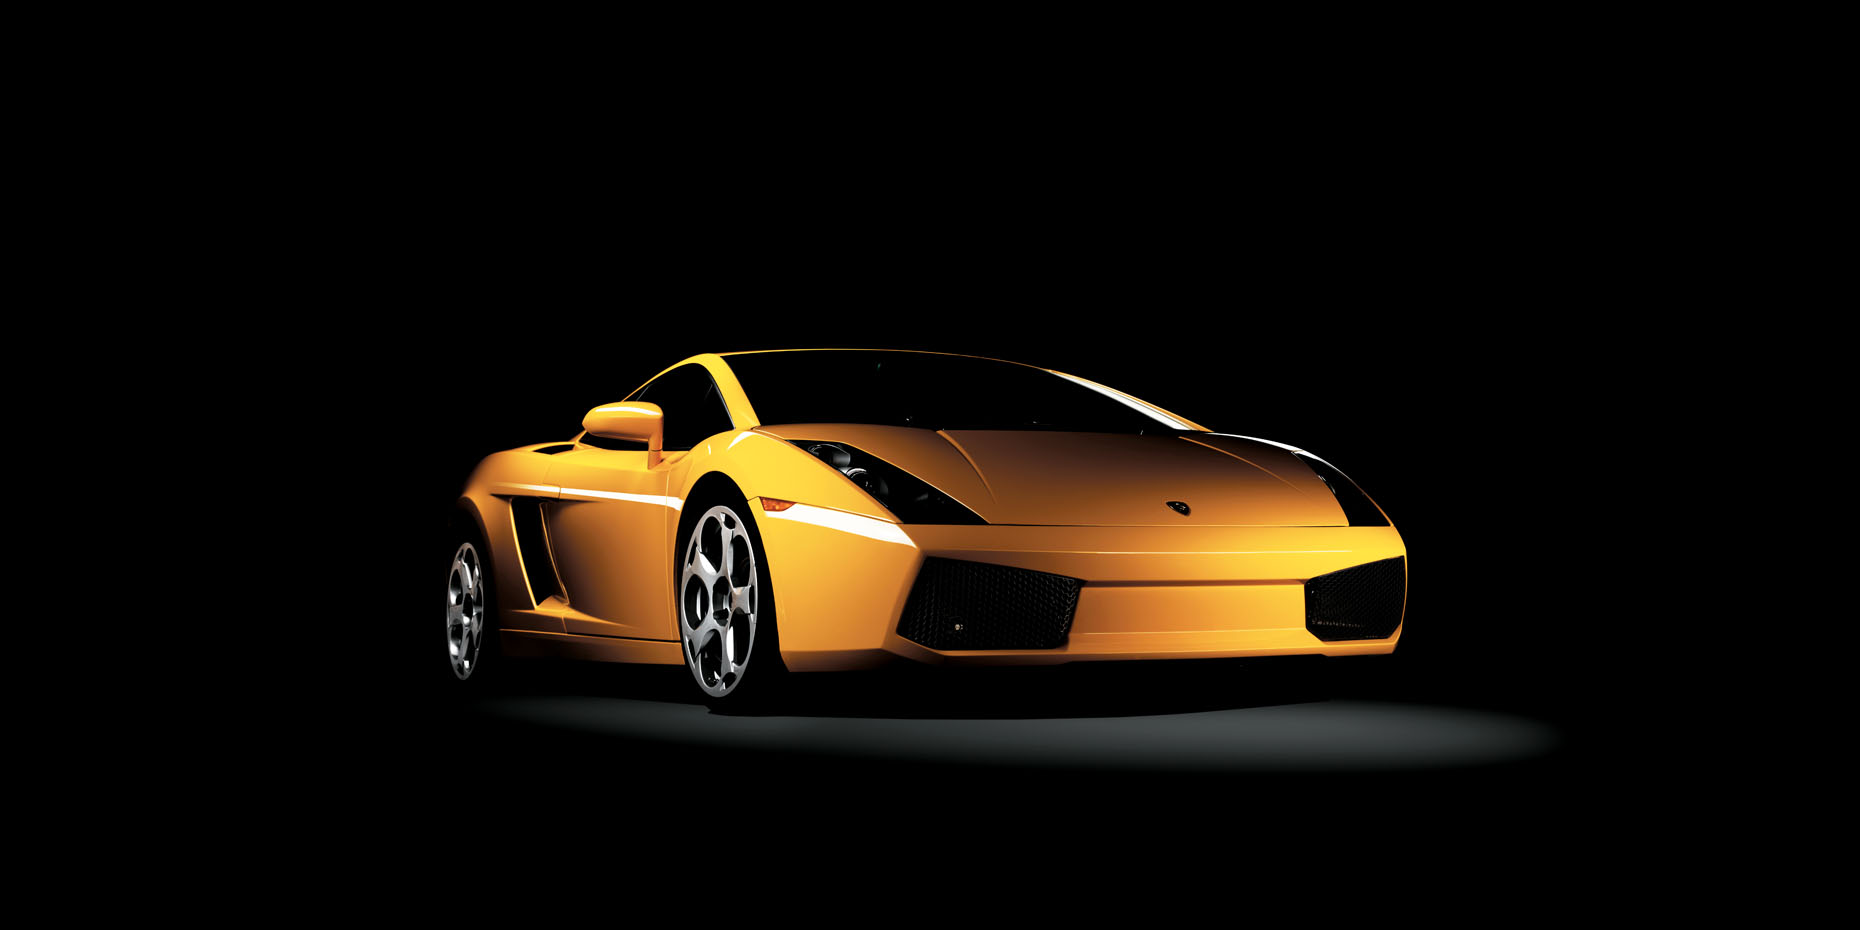 A front shot of a yellow Lamborgini photographed in a studio on a black background.